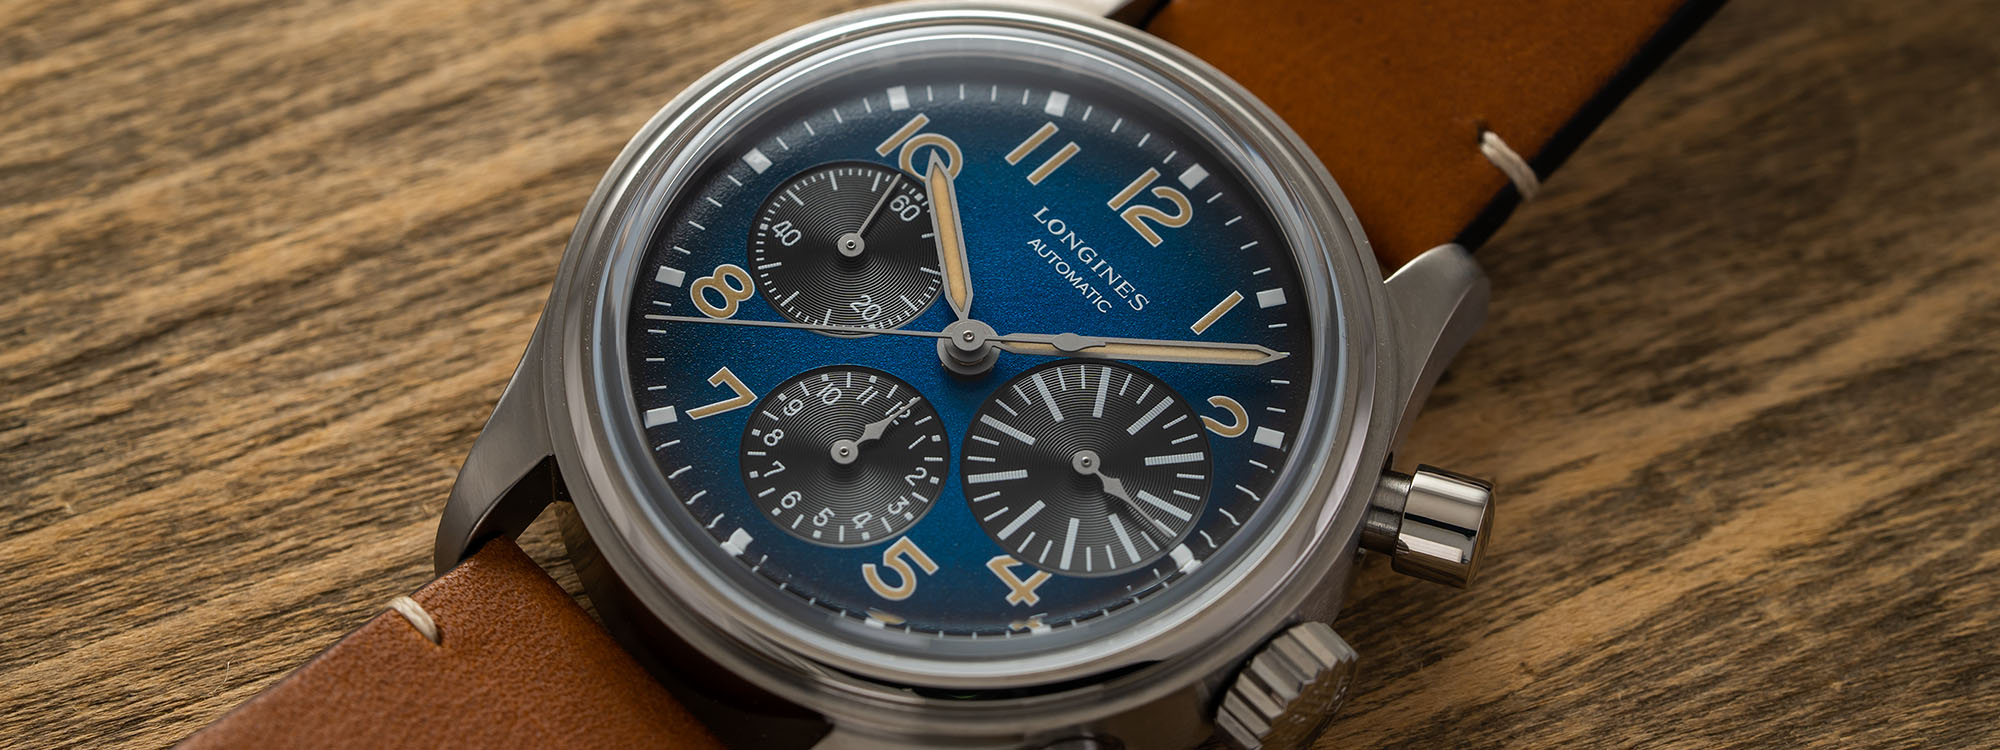 The hour of horlogerie with Louis Erard Heritage - The Watch Guide